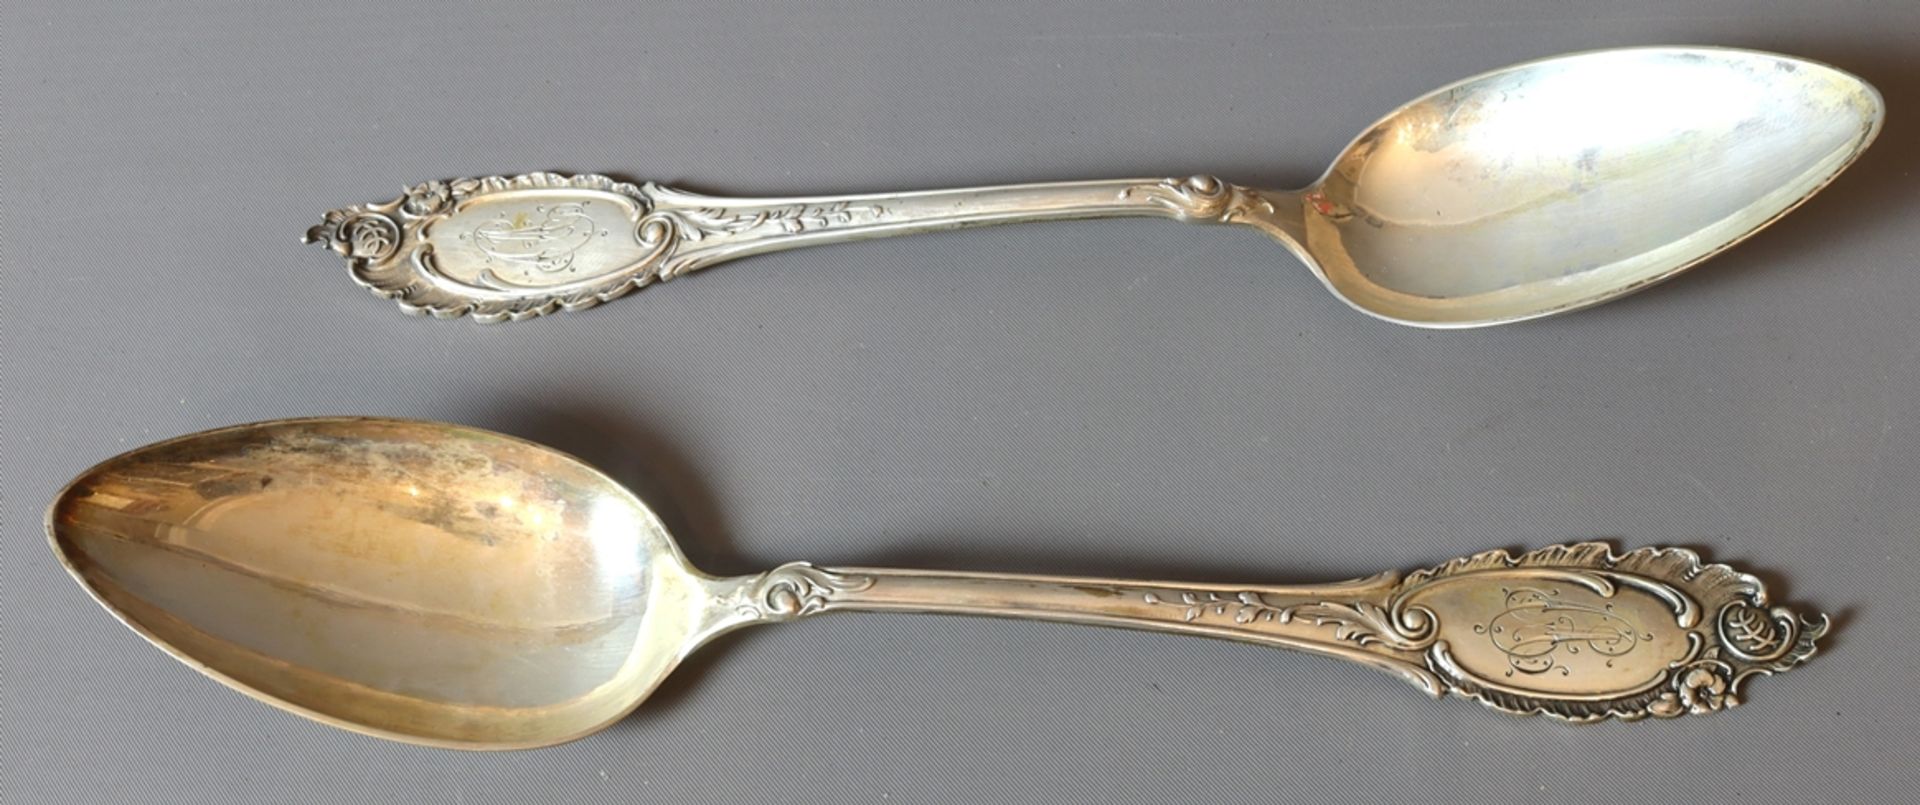 Set of 6 silver dinner spoons, Historicism circa 1880, German - Image 2 of 3